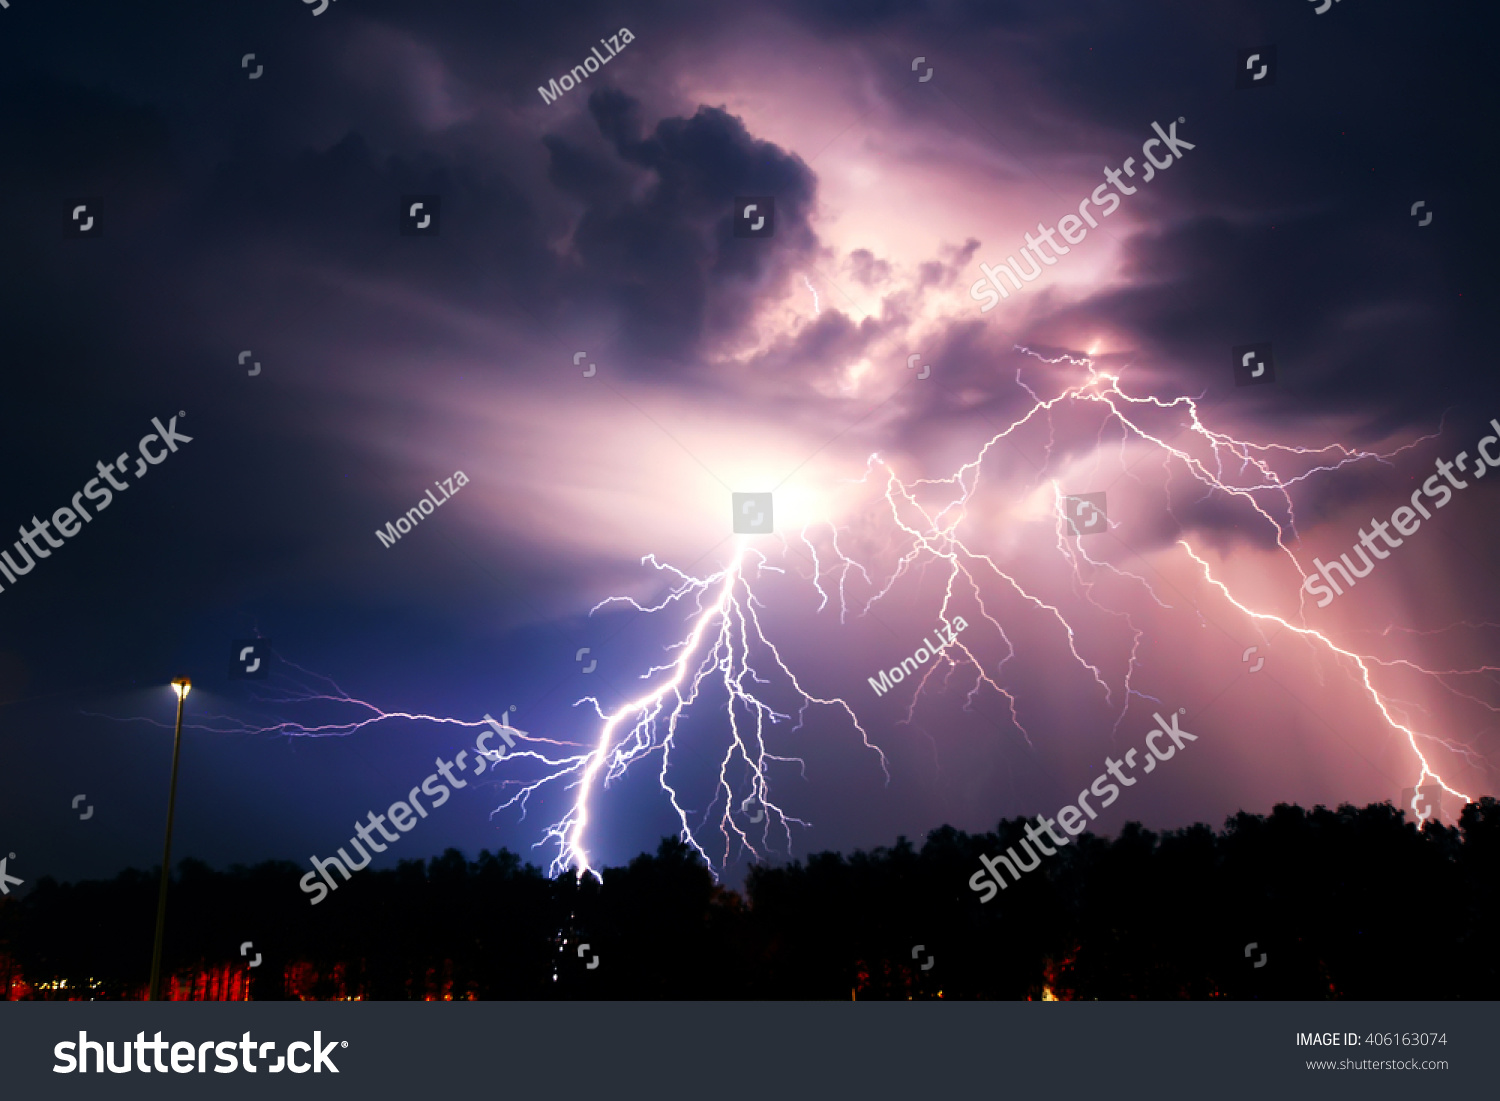 Lightning with dramatic clouds (composite image). Night thunder-storm #406163074